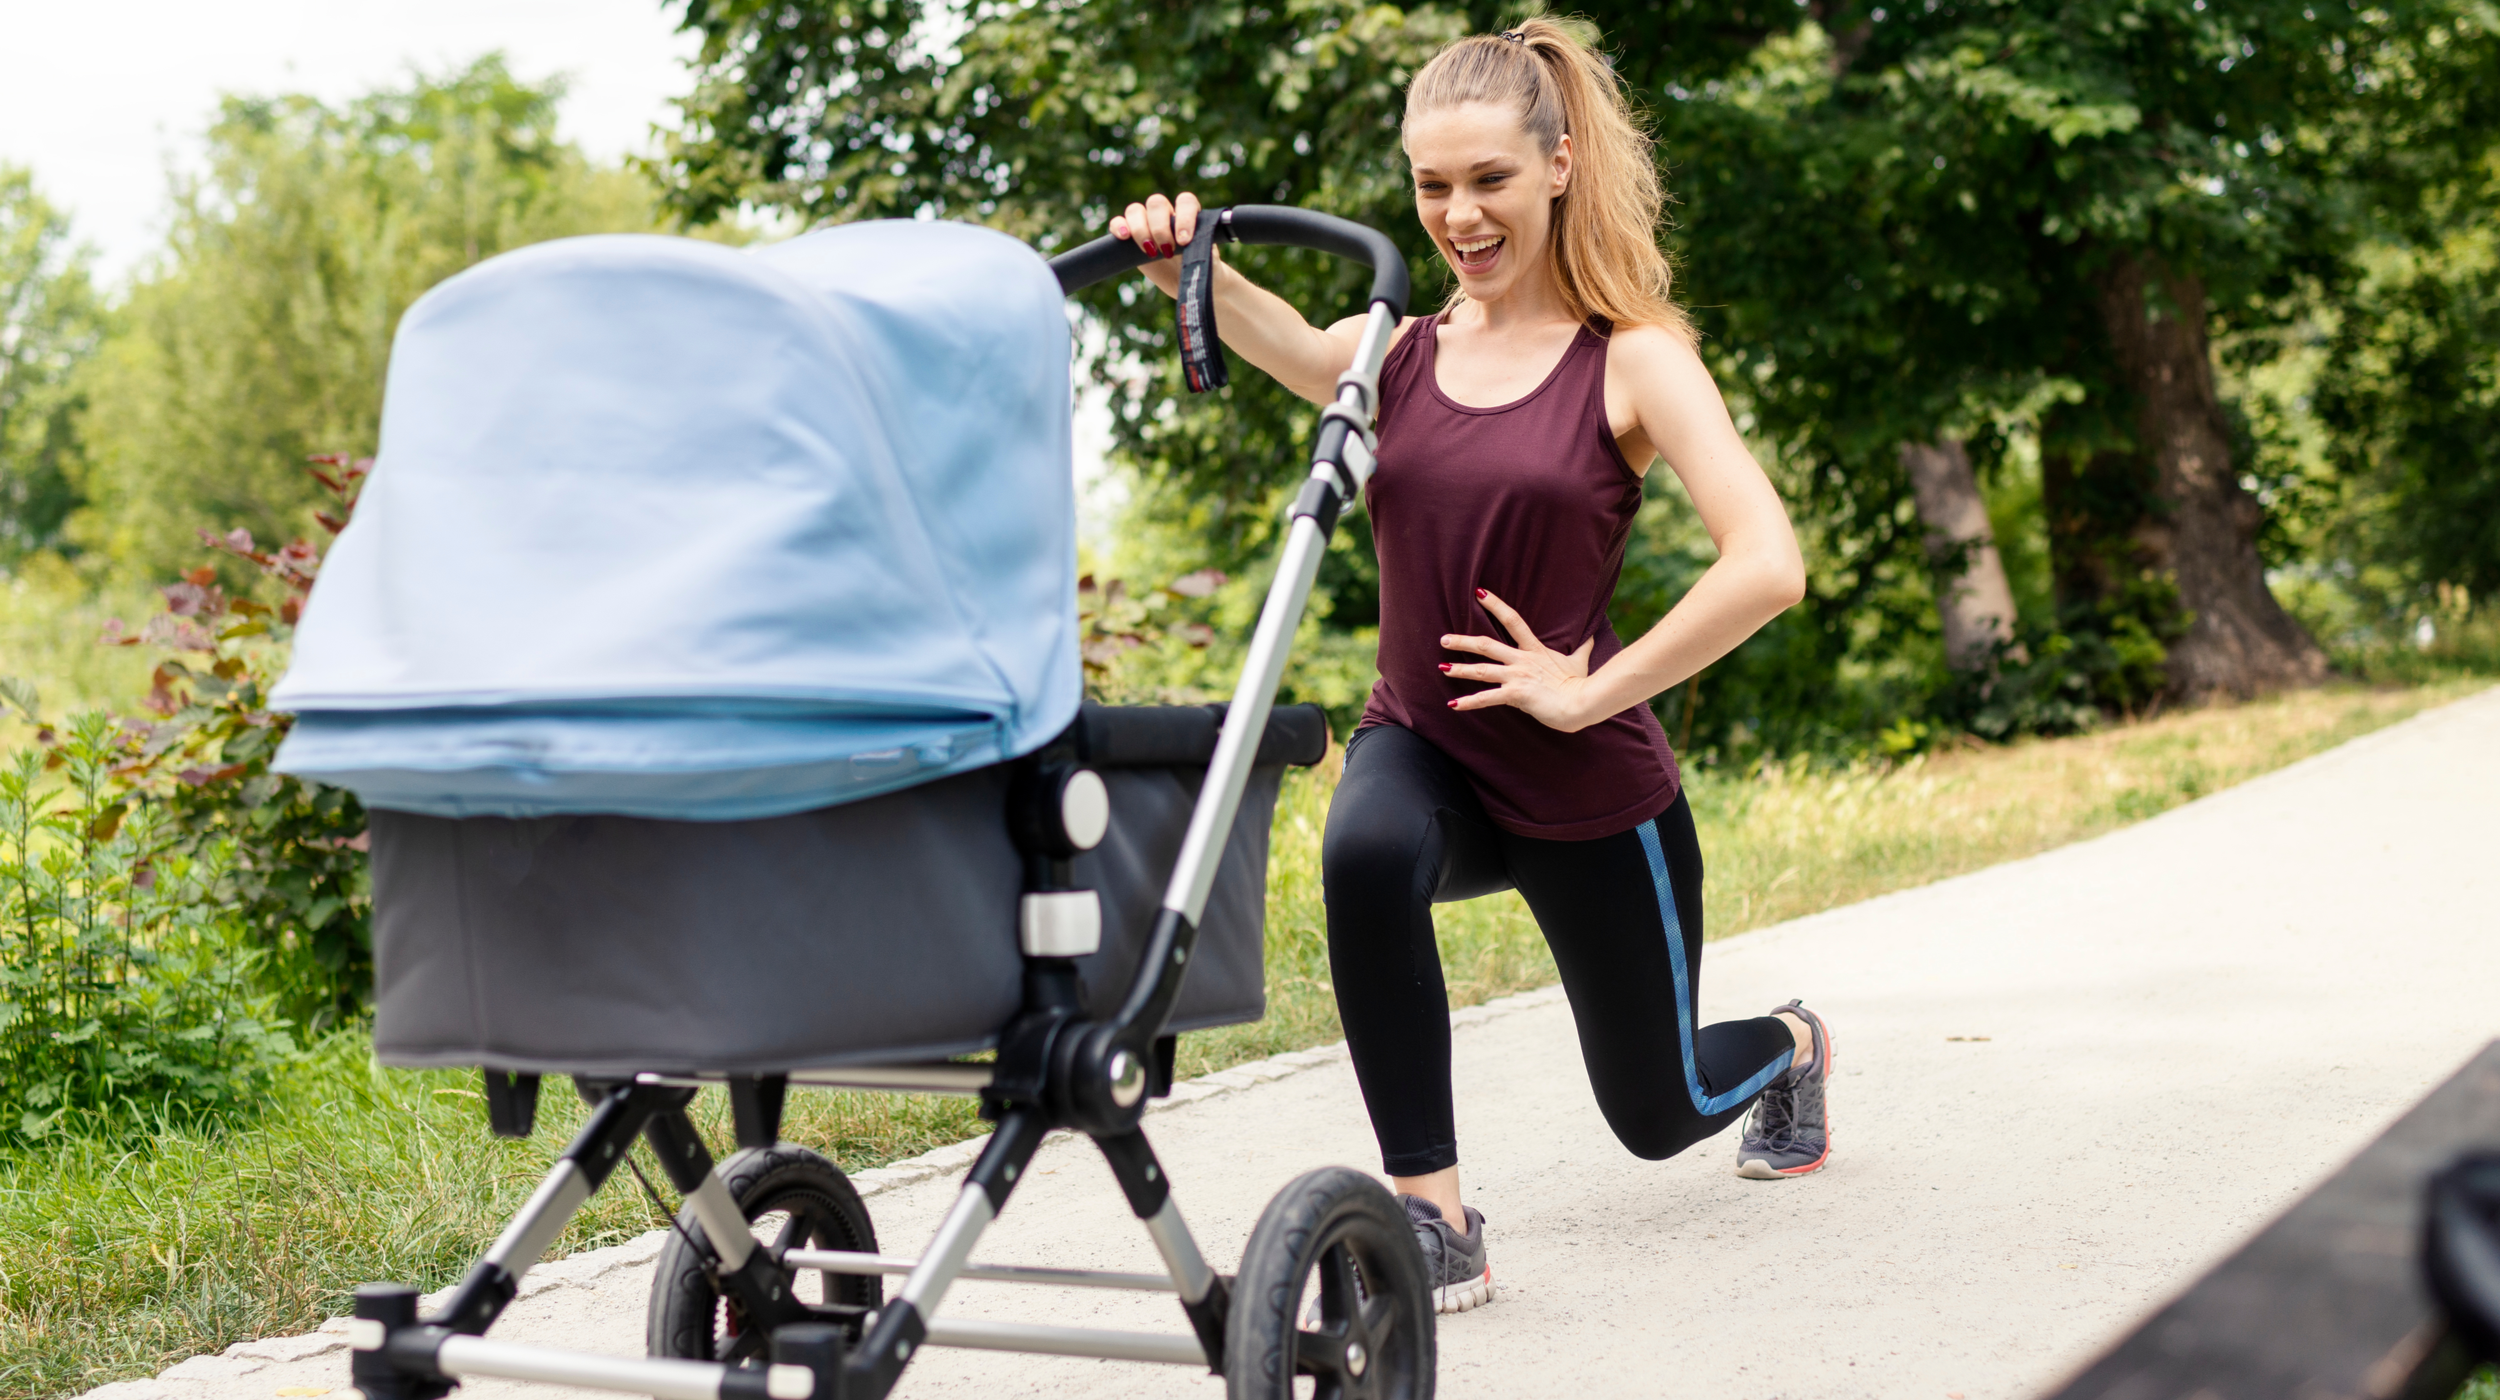 Getting Back into Your Fitness Routine After Having a Baby